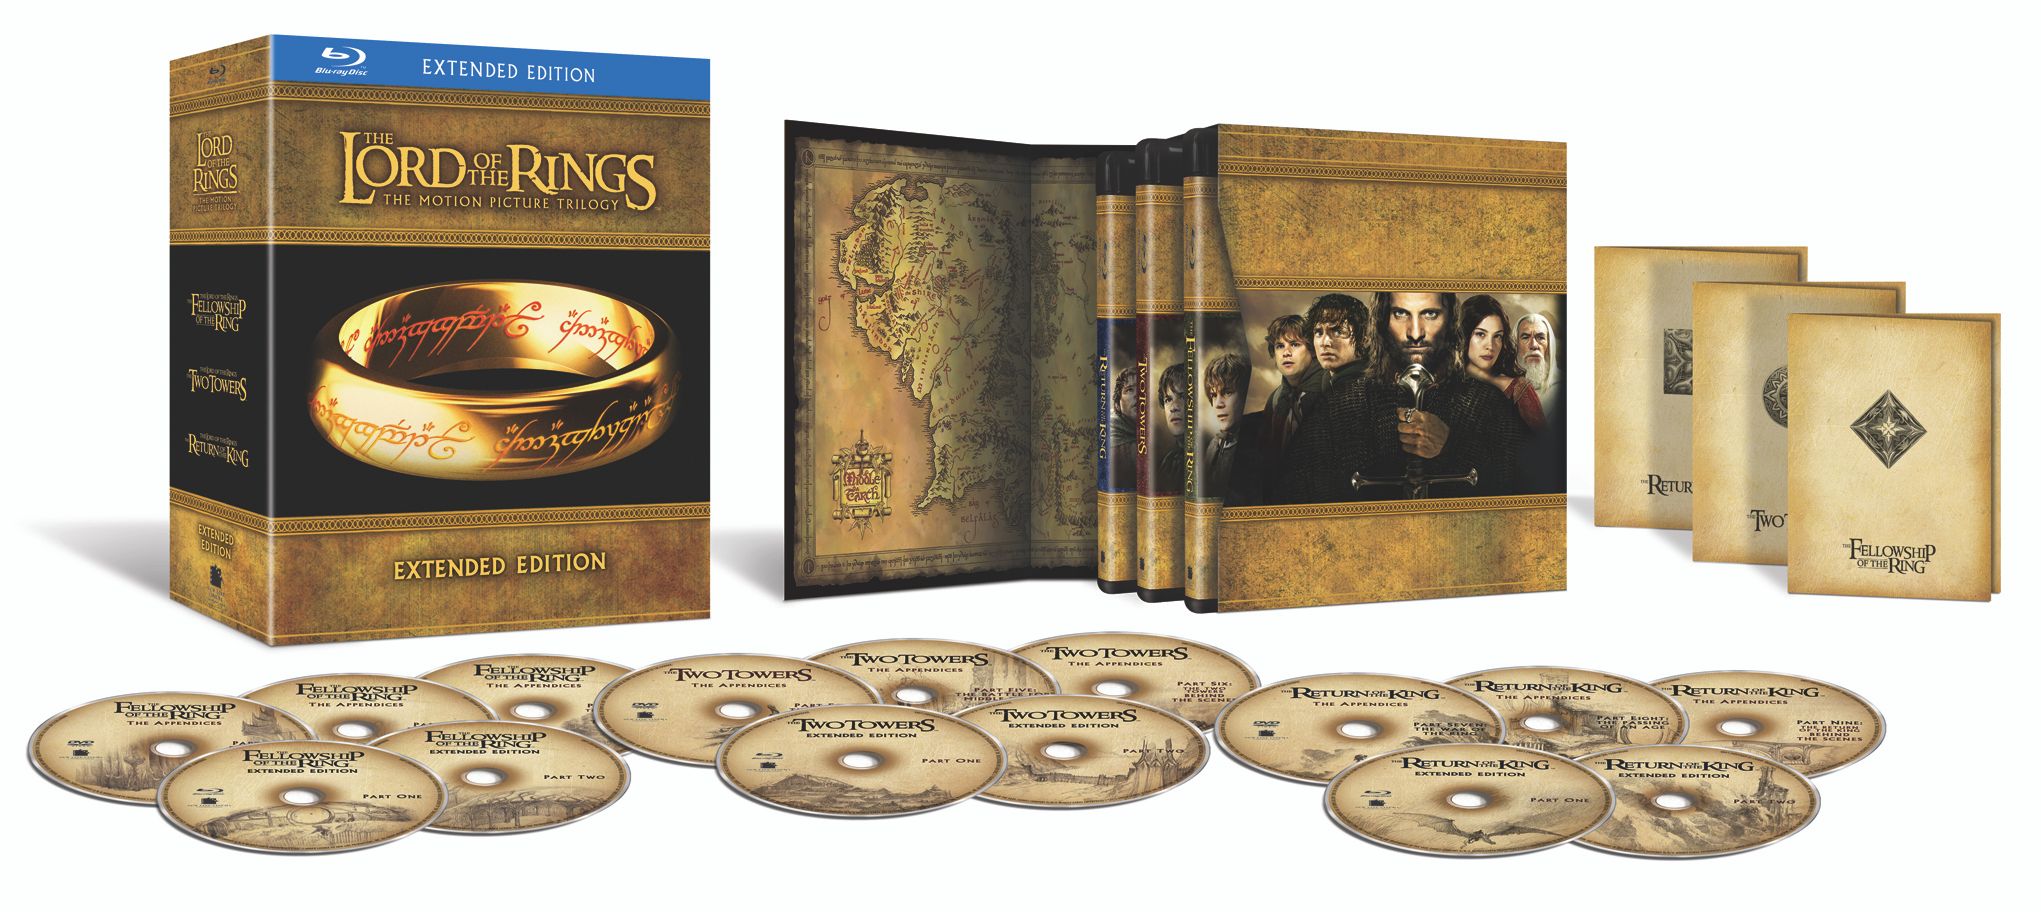 http://cdn.collider.com/wp-content/uploads/the-lord-of-the-rings-the-motion-picture-trilogy-extended-edition-blu-ray-image-2.jpg